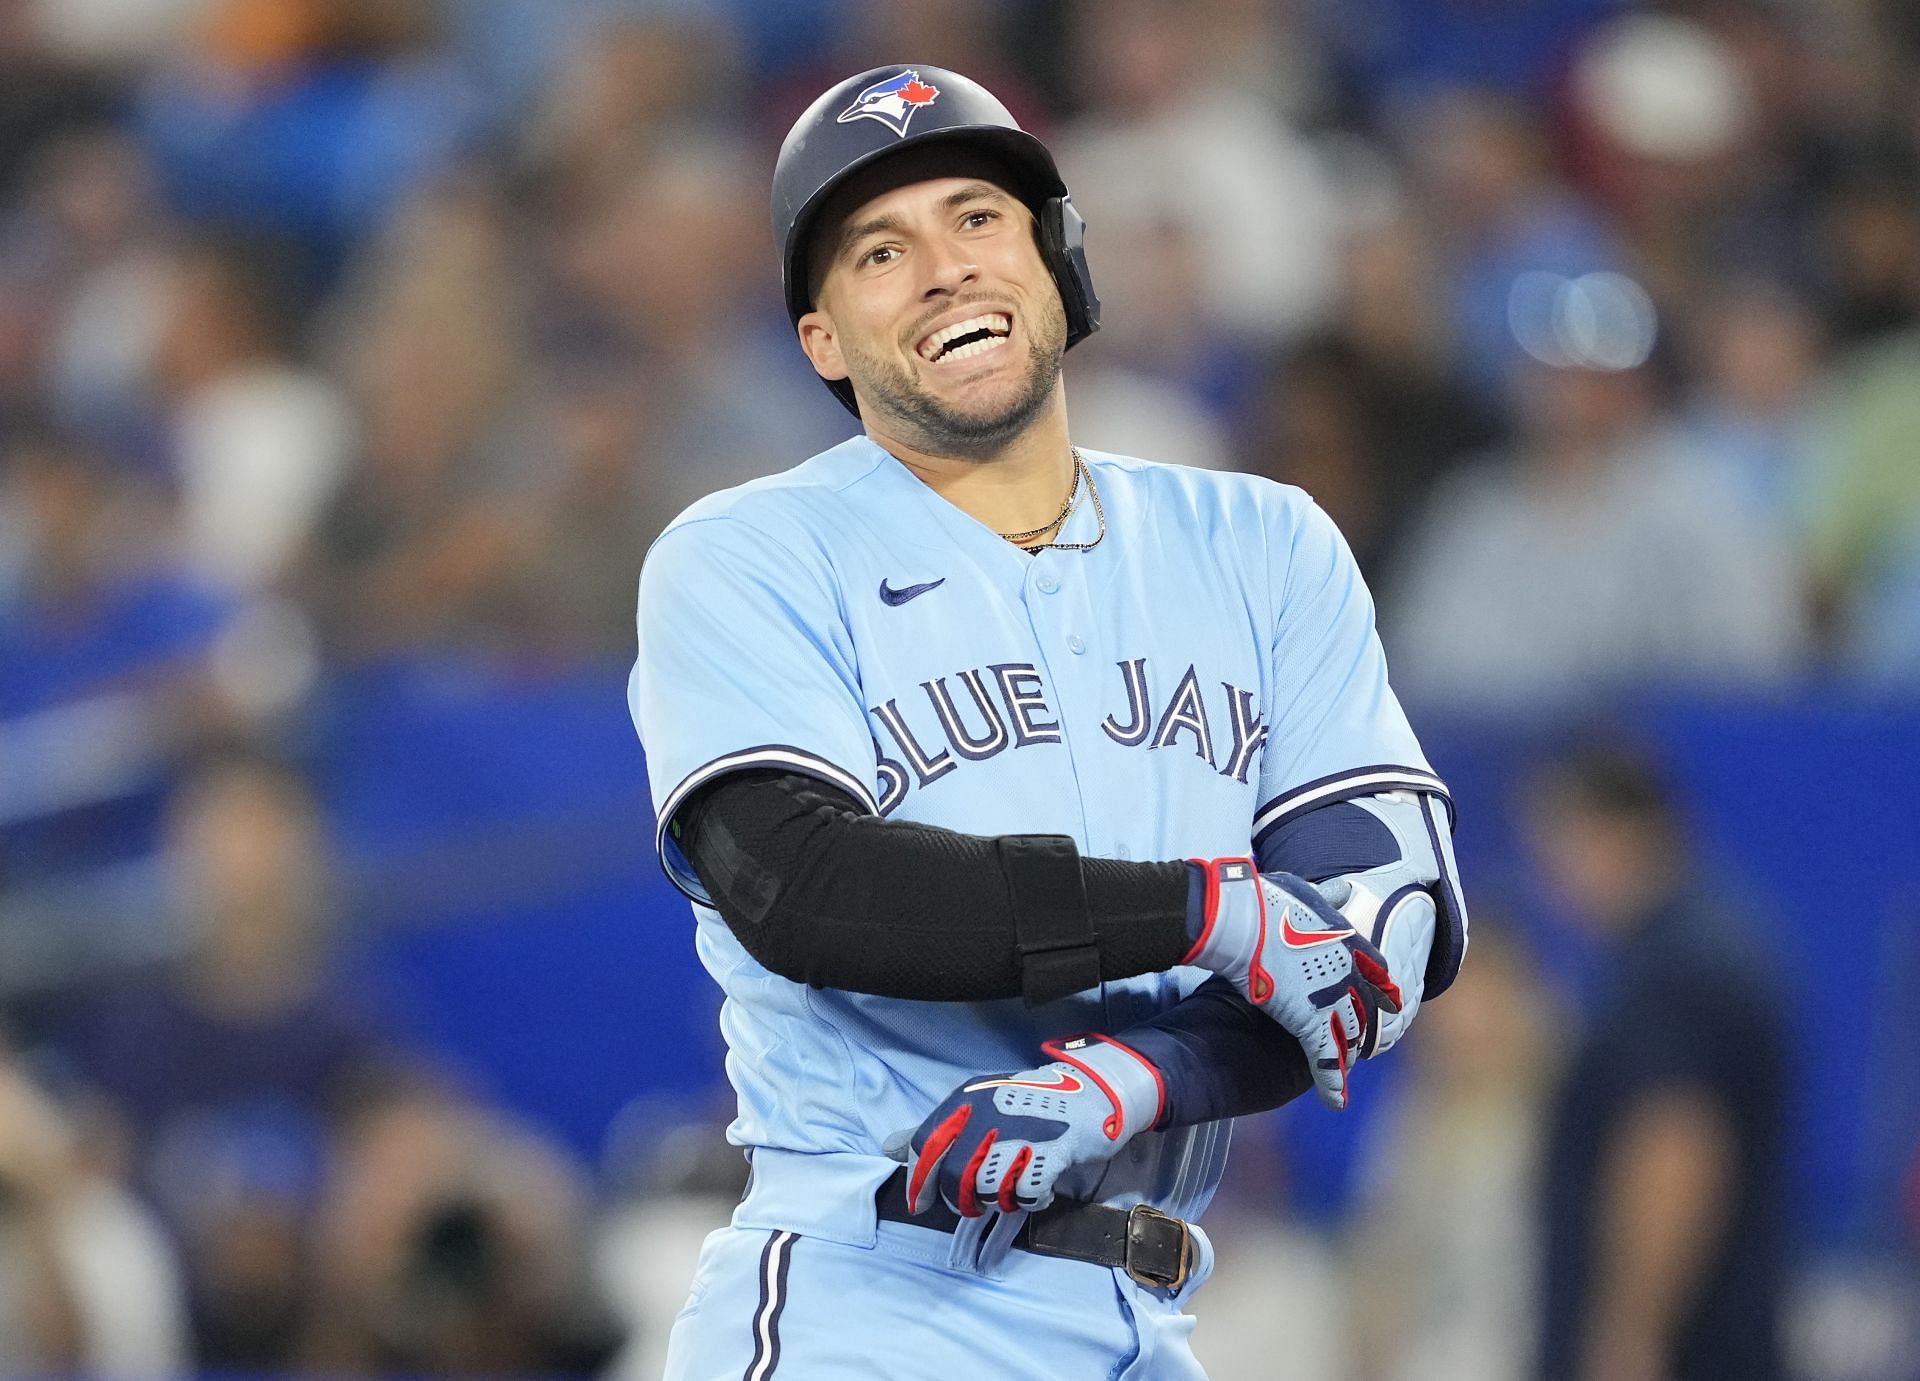 George Springer will be the best outfielder next year in Toronto